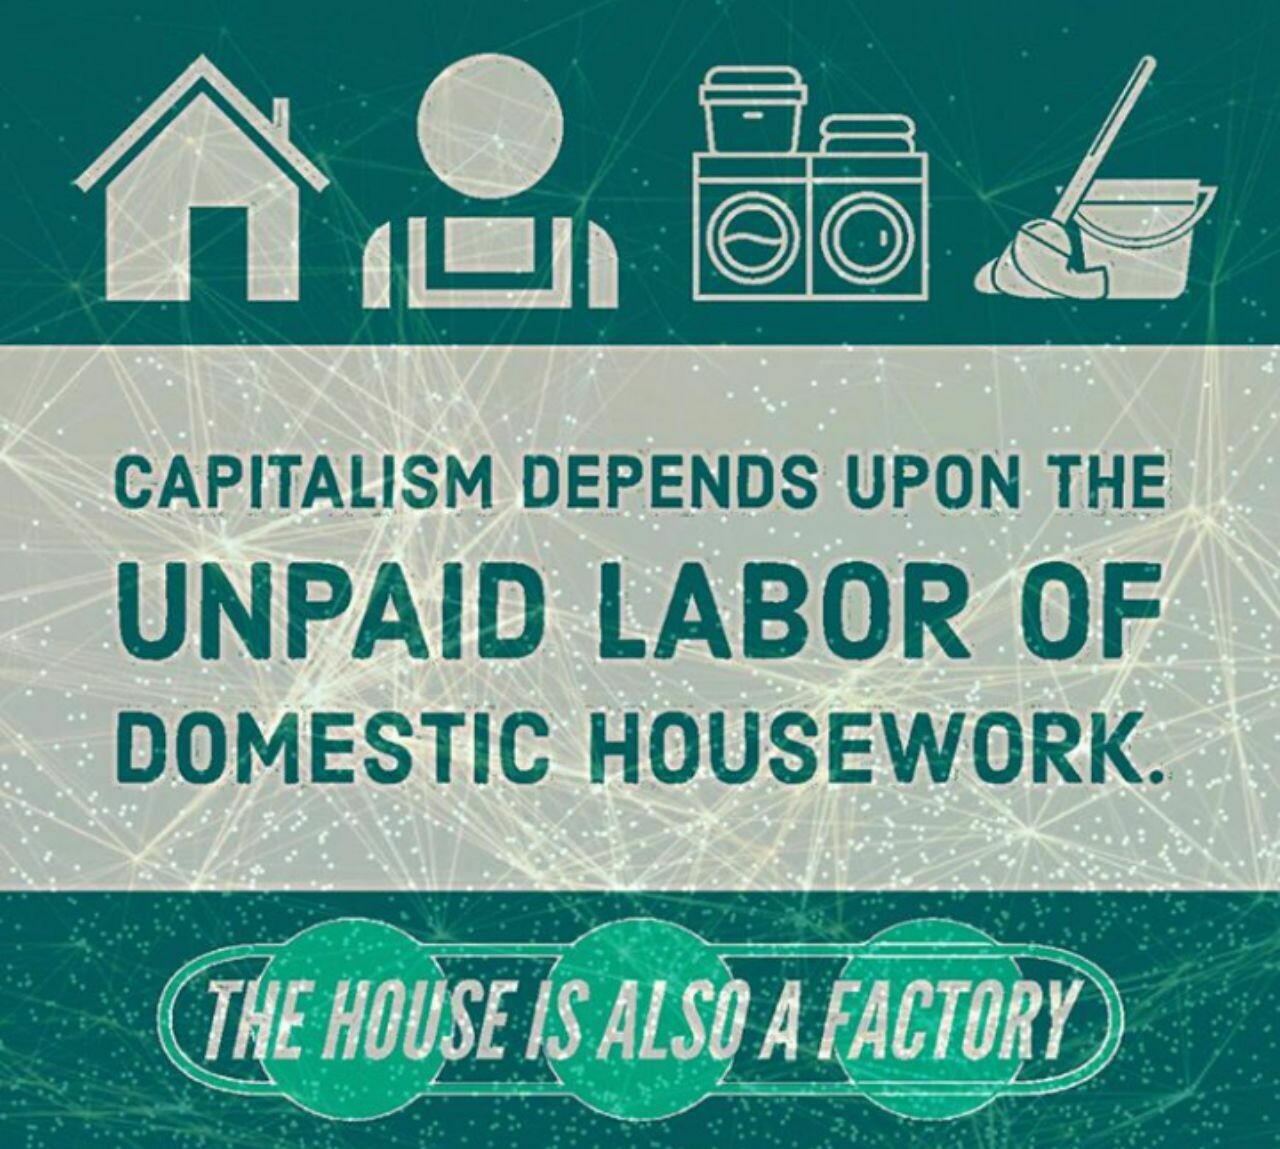 Capitalism depends upon the unpaid labor of domestic housework. The house is also a factory.